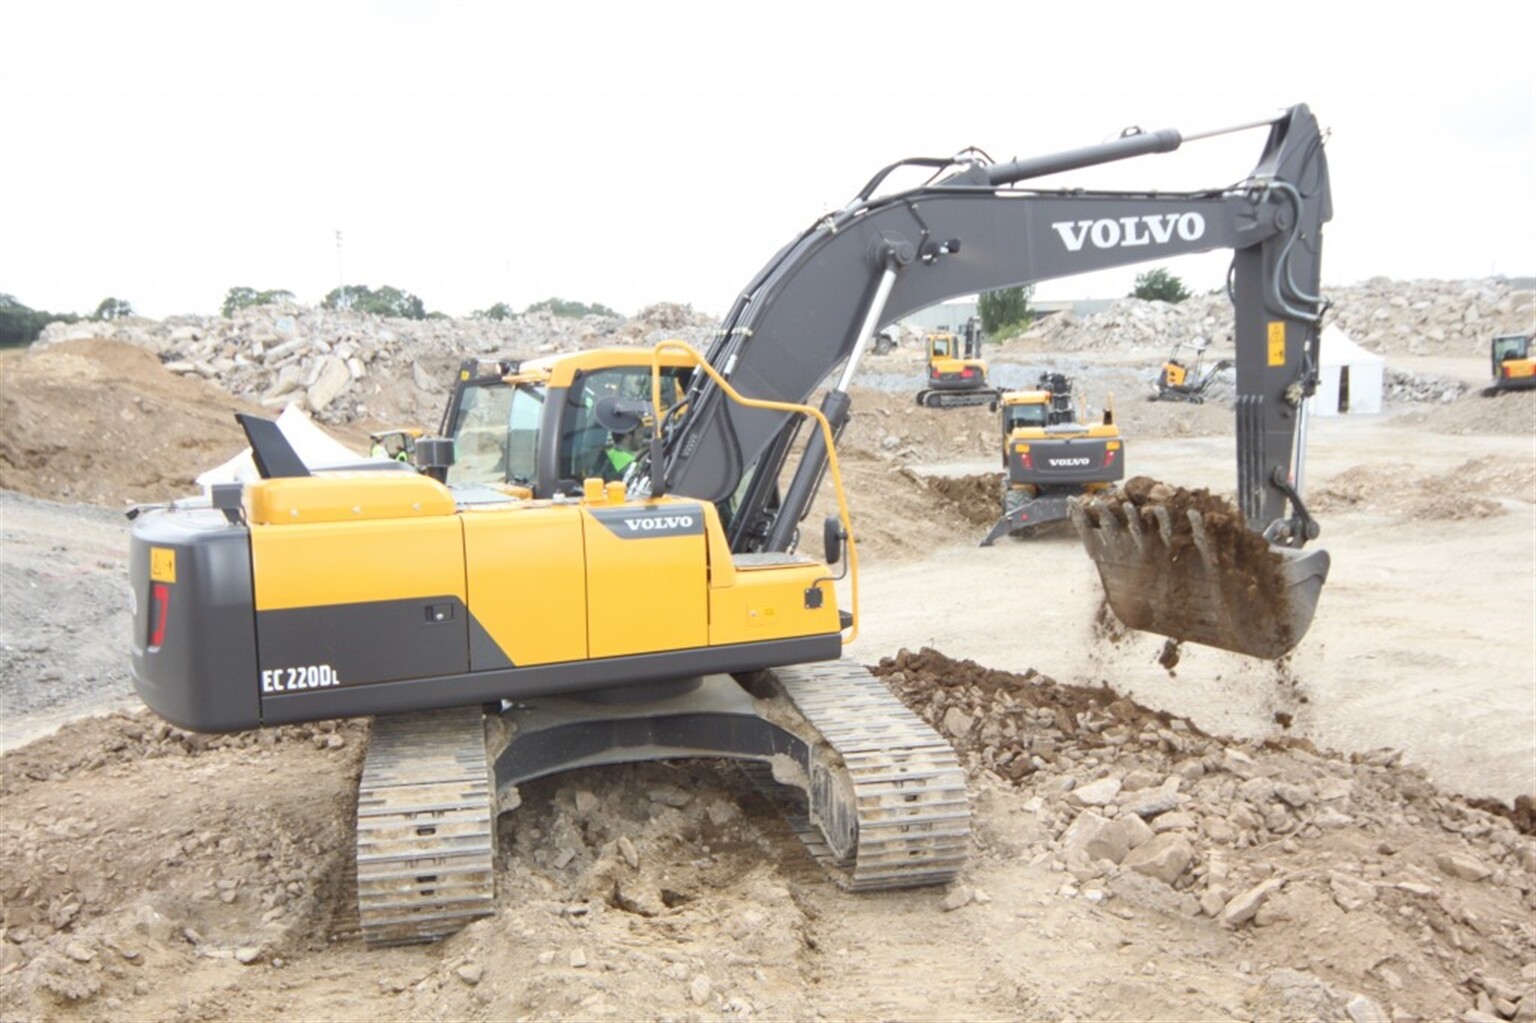 Hands on with a Volvo D Series excavator